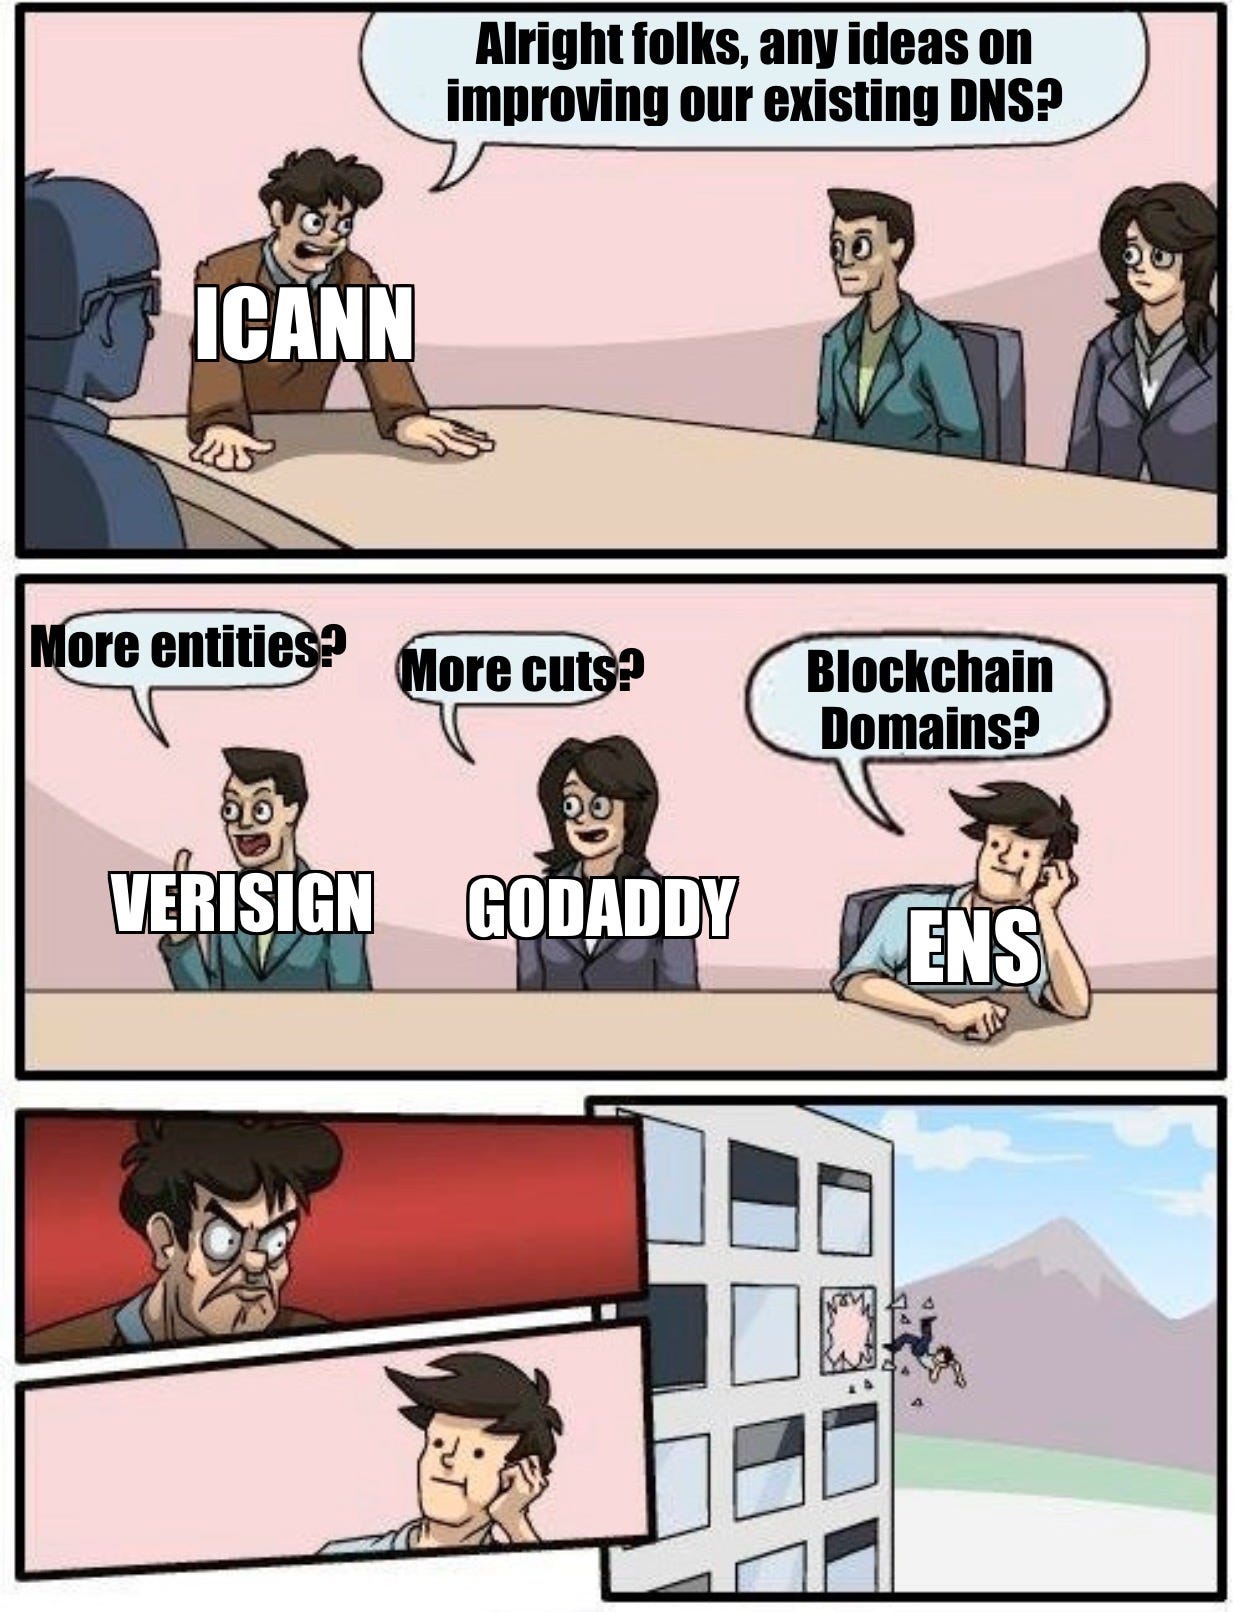 Blockchain Domains vs. Traditional DNS (context: meeting room suggestion meme)